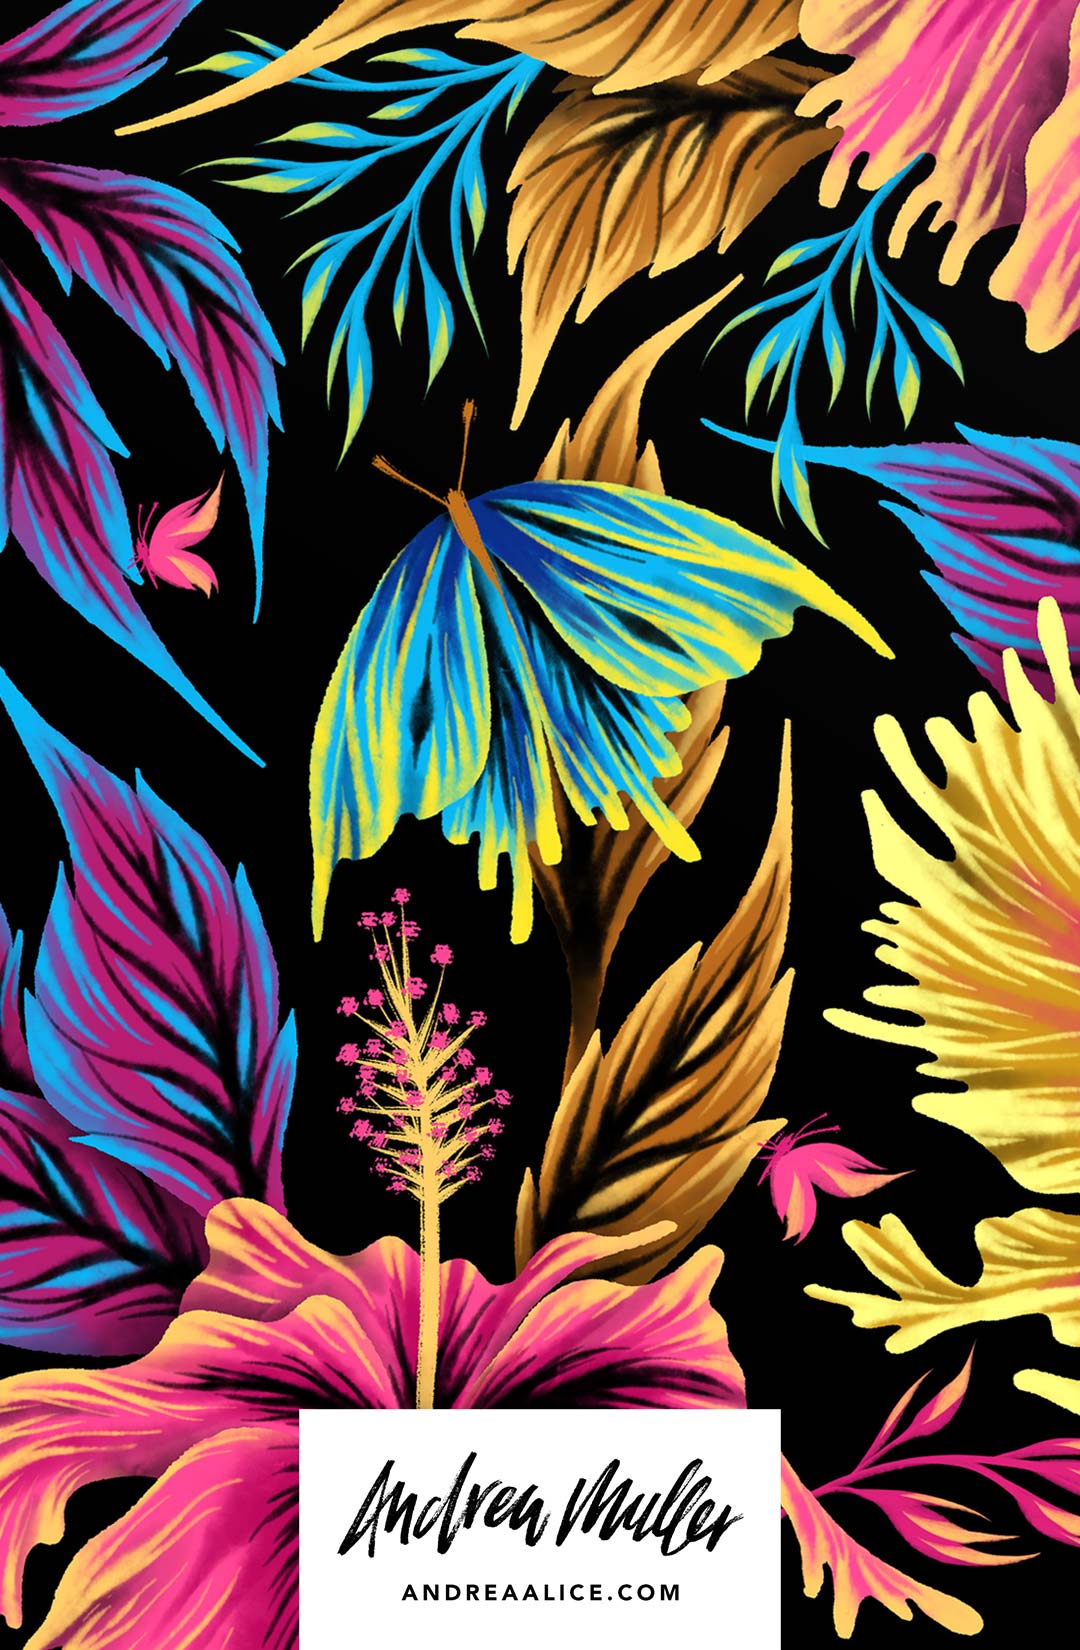 Colorful tropical butterflies pattern detail illustration by Andrea Muller